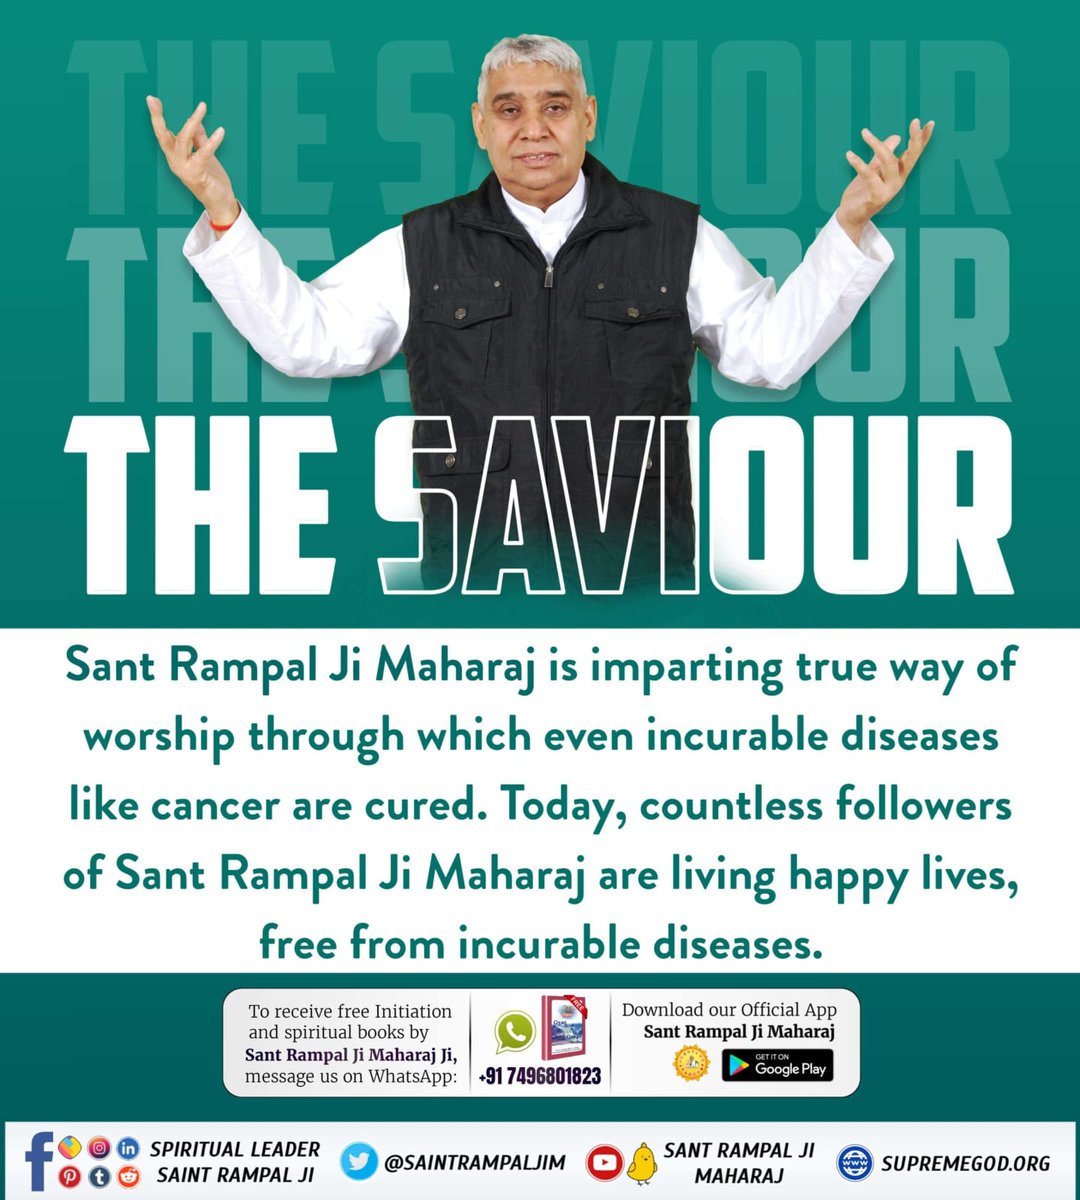 #जगत_उद्धारक_संत_रामपालजी THE SAVIOUR Sant Rampal Ji Maharaj is imparting true way of worship through which even incurable diseases like cancer are cured. Today, countless followers of SantRampalJi Maharaj are living happy lives, free from incurable diseases. Saviour Of The World